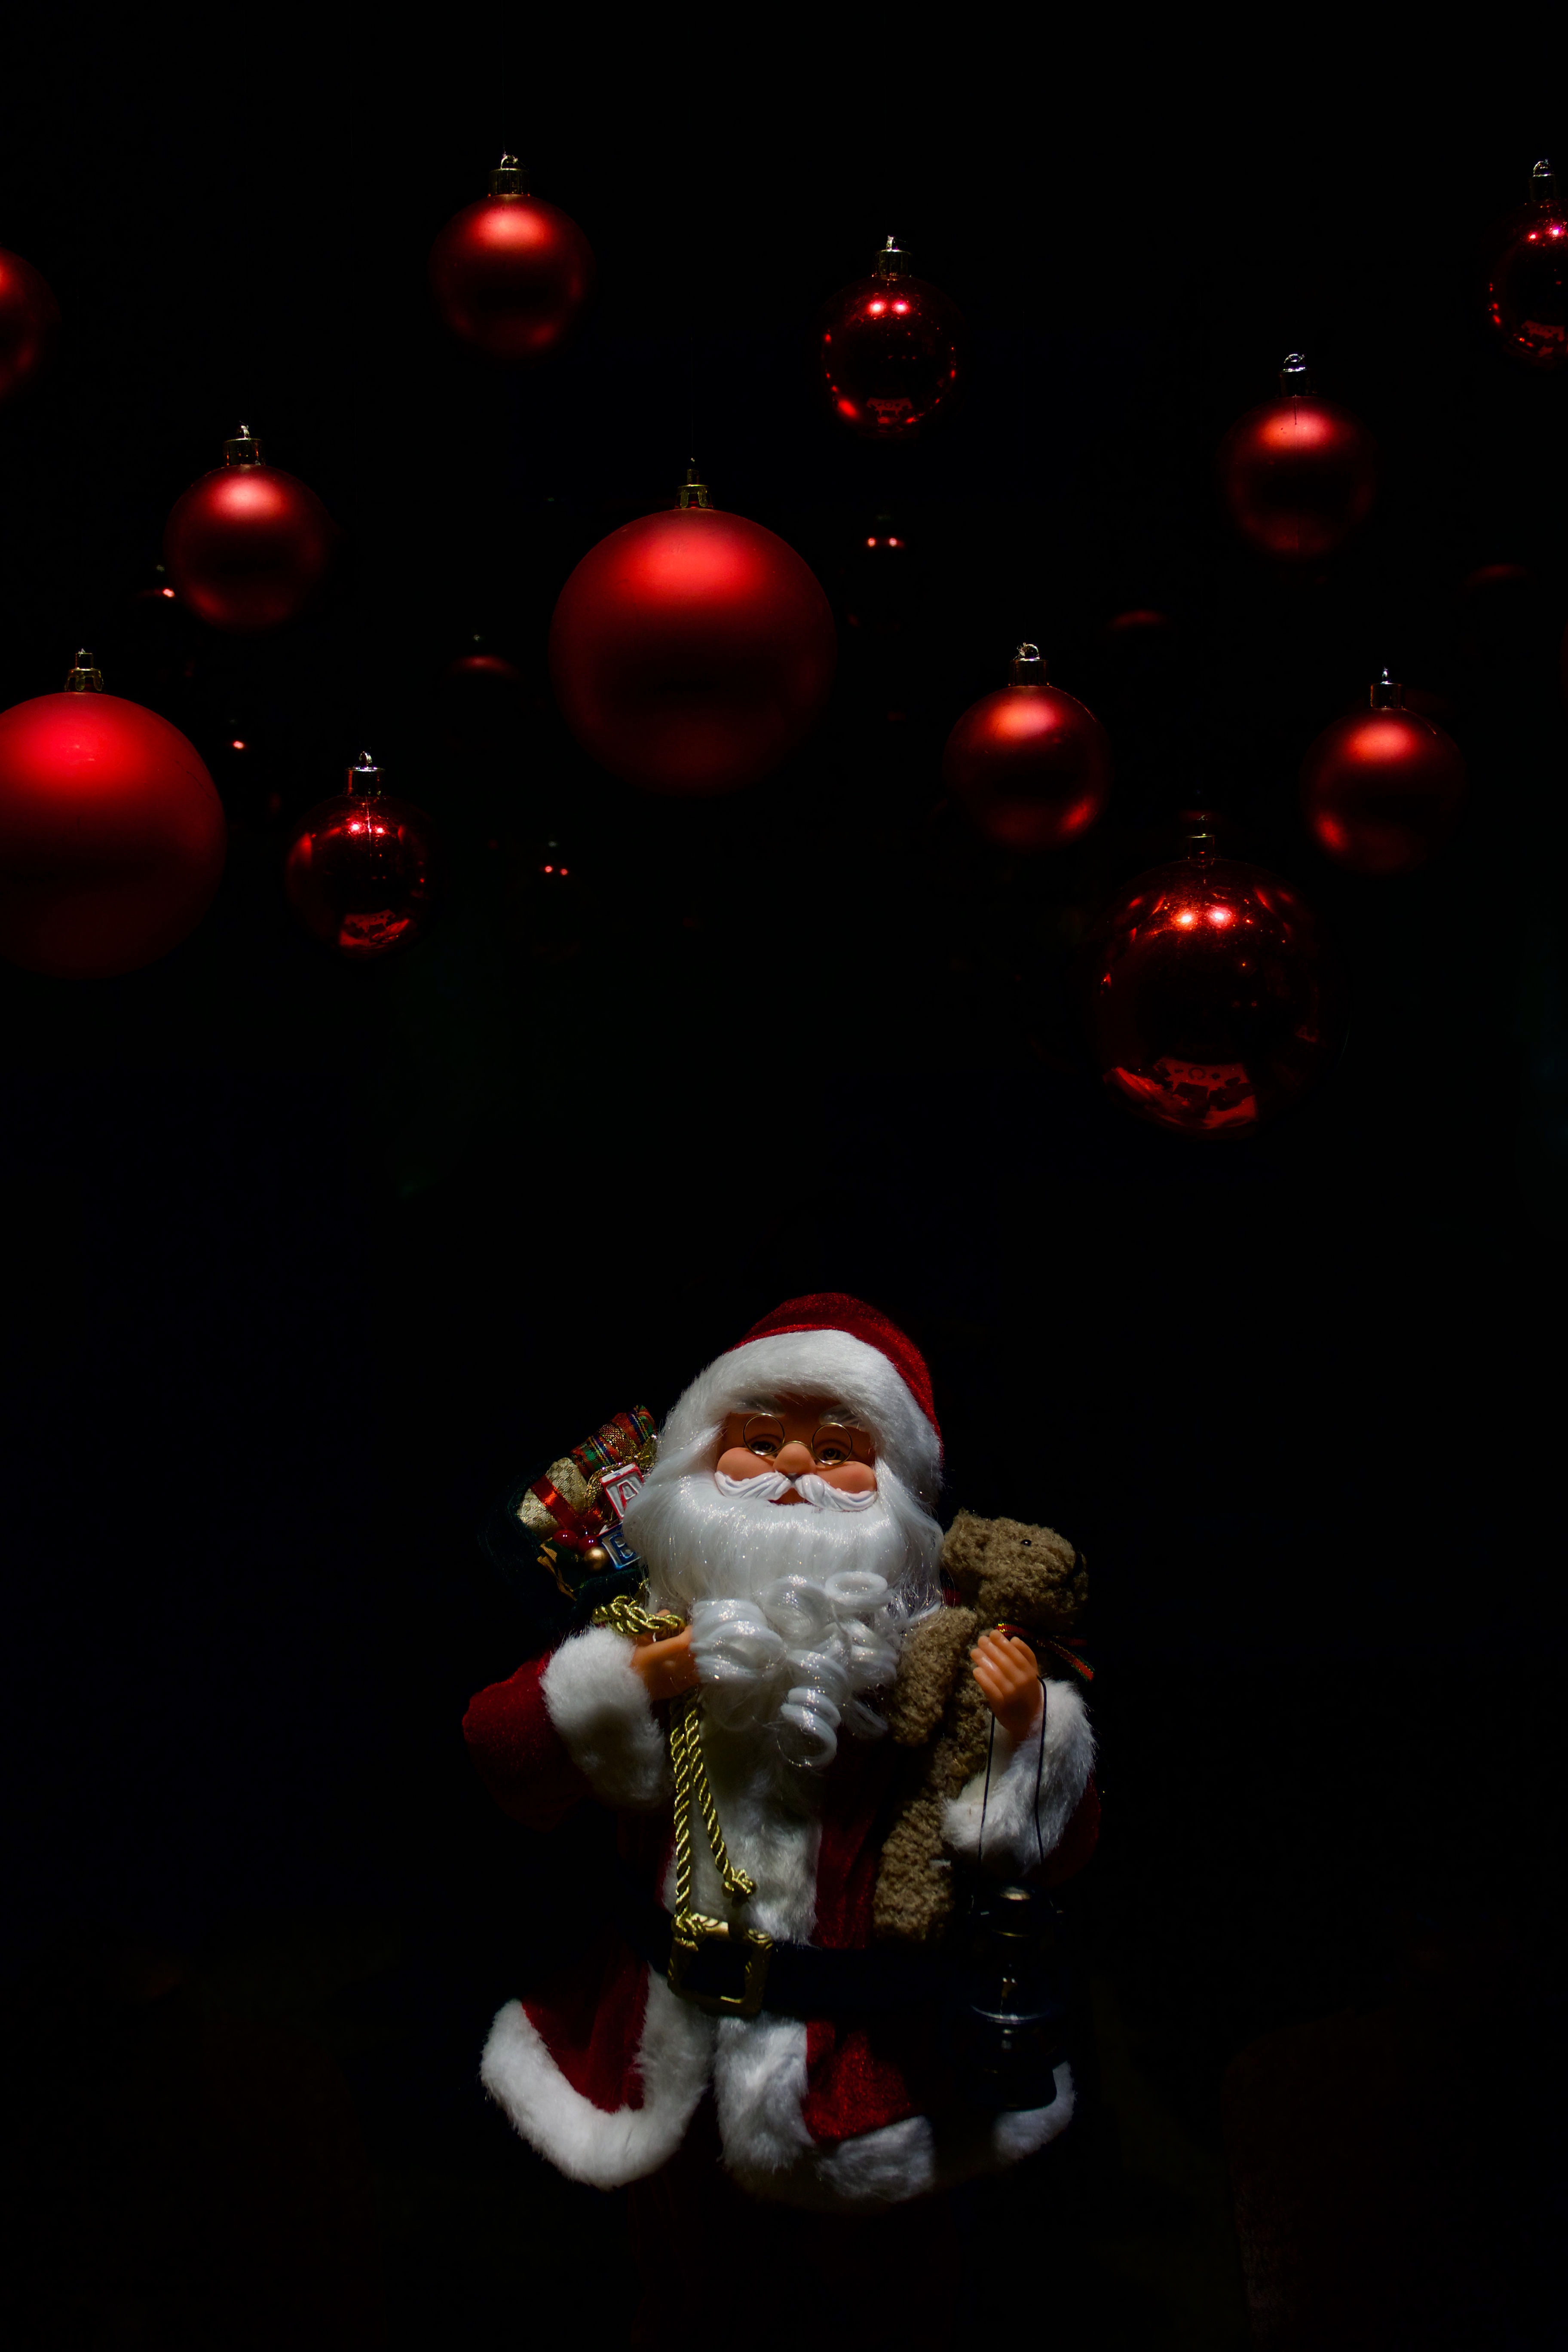 Santa claus old mobile, cell phone, smartphone wallpapers hd, desktop  backgrounds 240x320 downloads, images and pictures